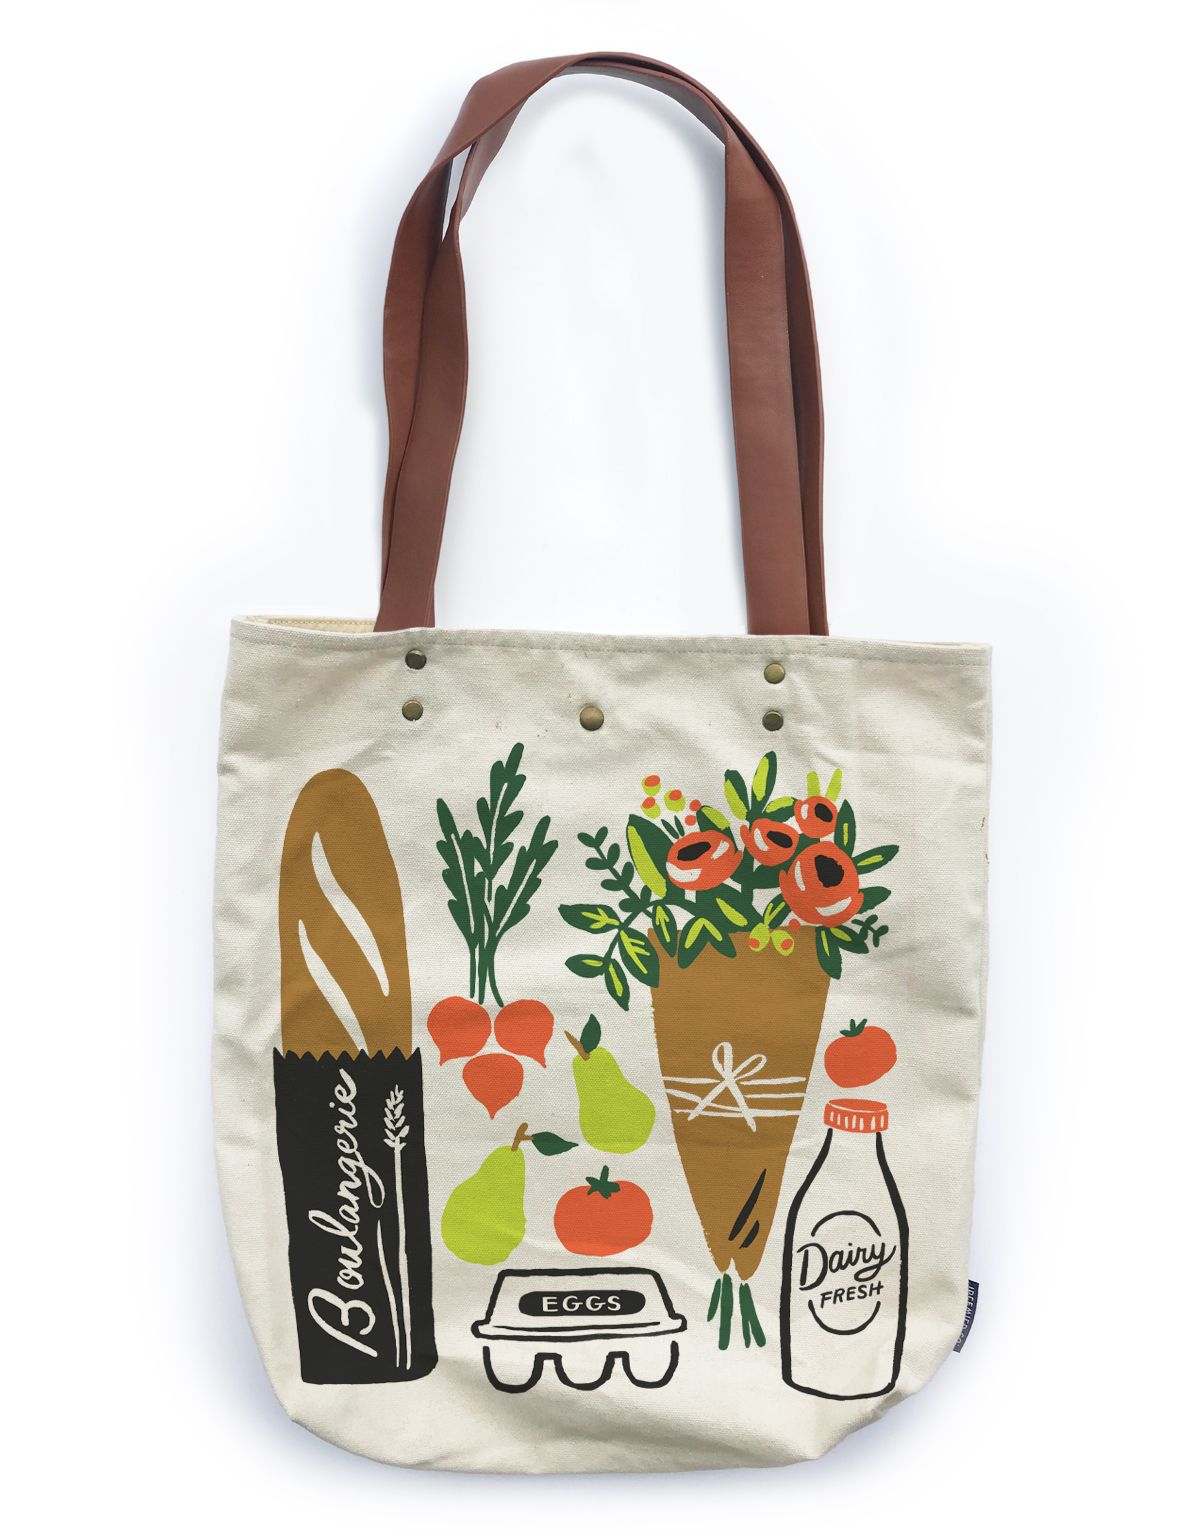 Details about   Mona B Farm To Table Large Farmers Market Tote Bag new nwt 